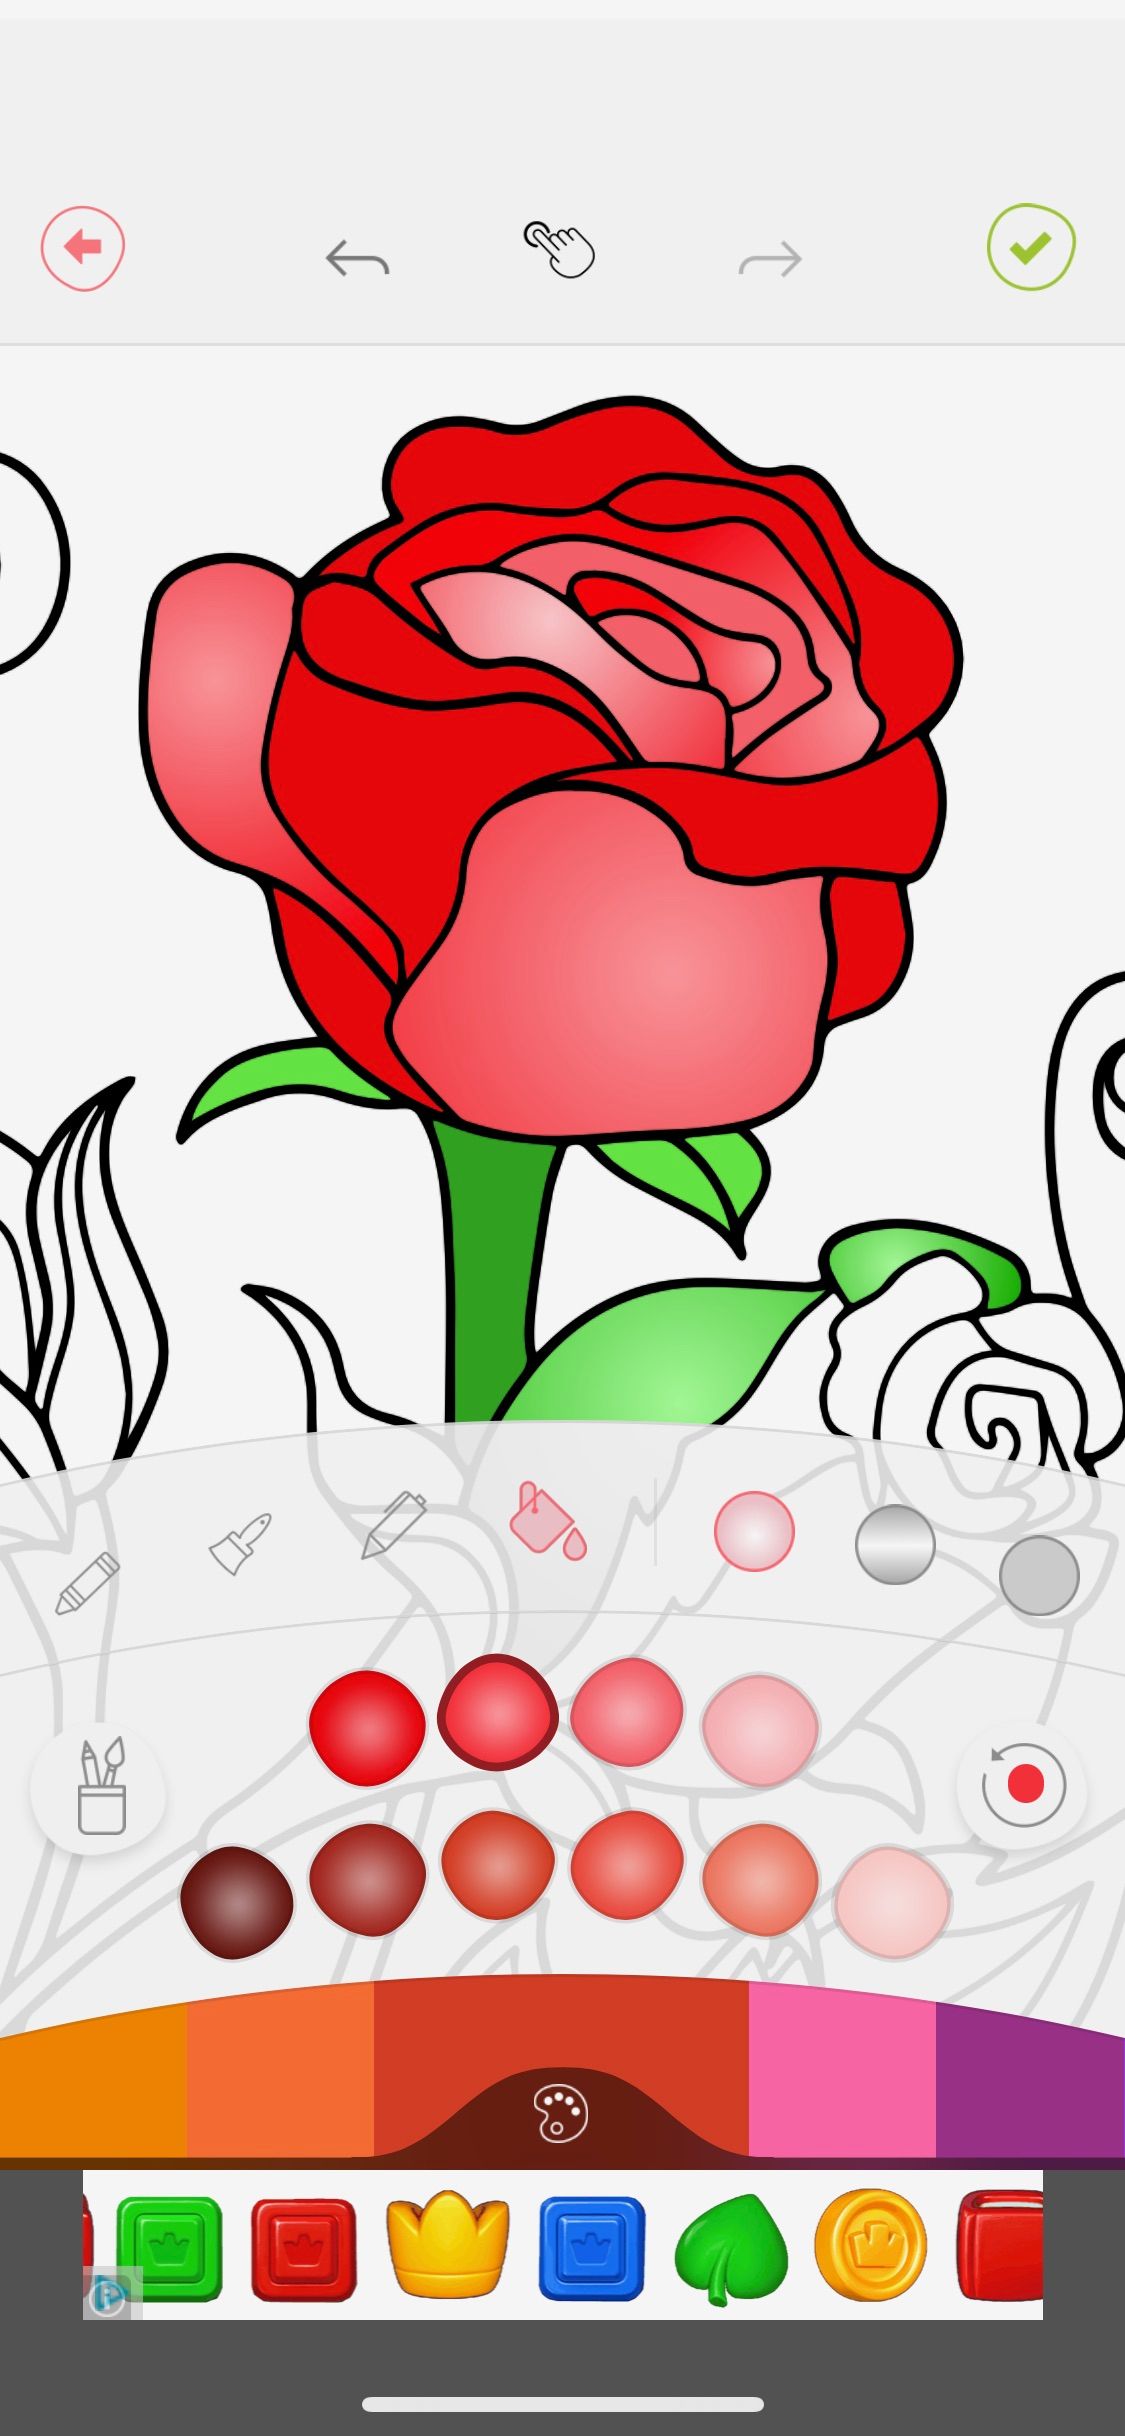 Screenshot showing sample colouring screen from Colorfy app